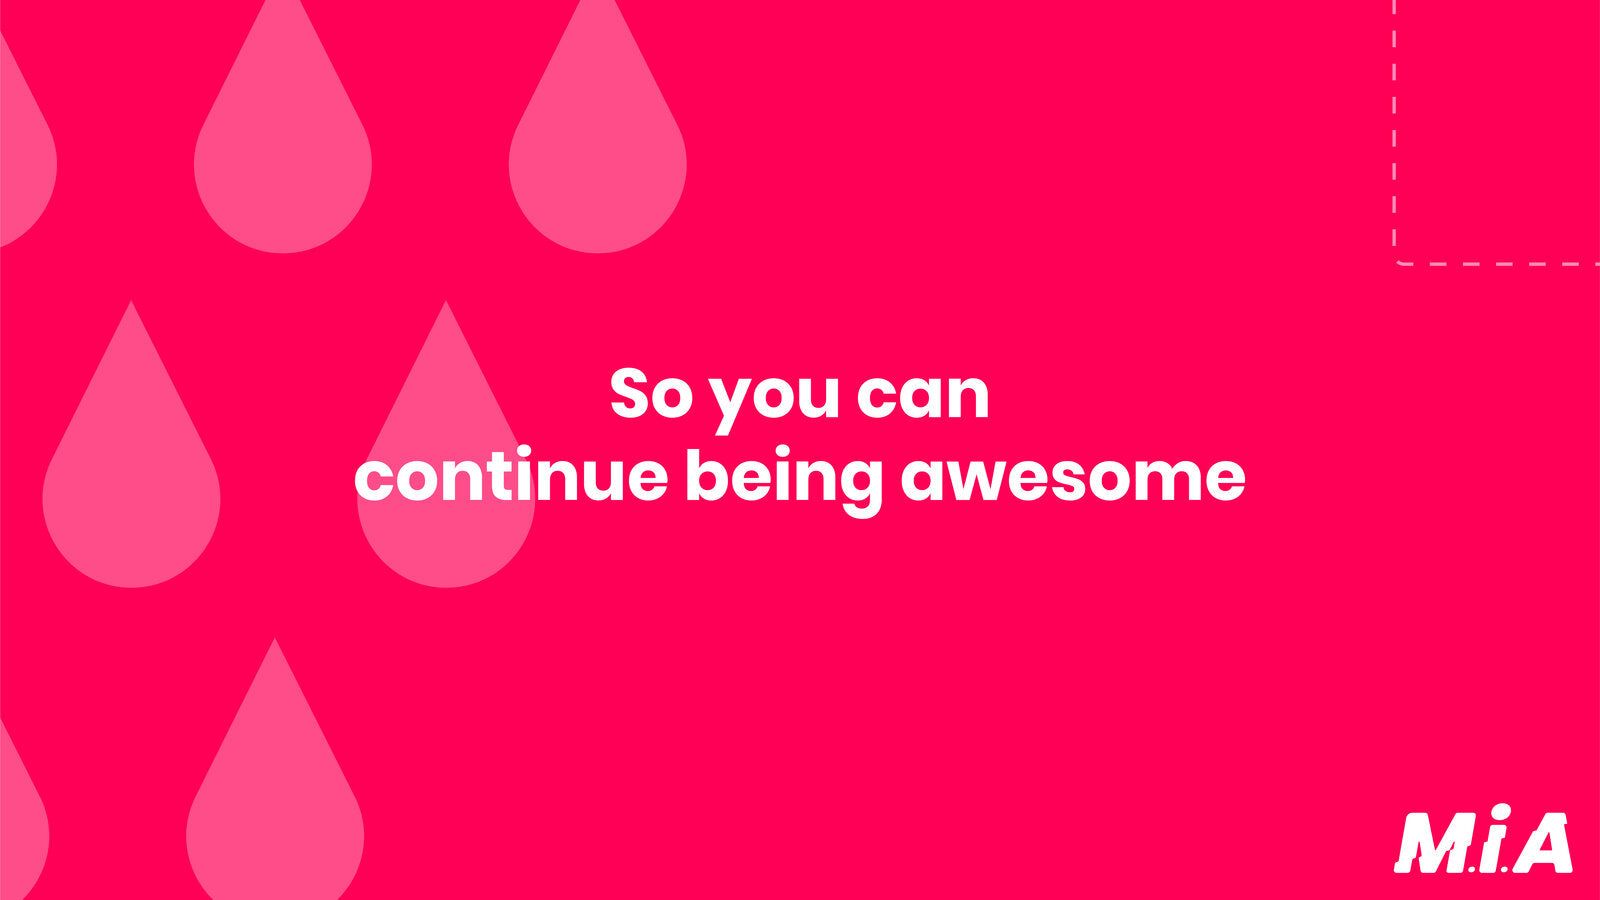 So you can continue being awesome